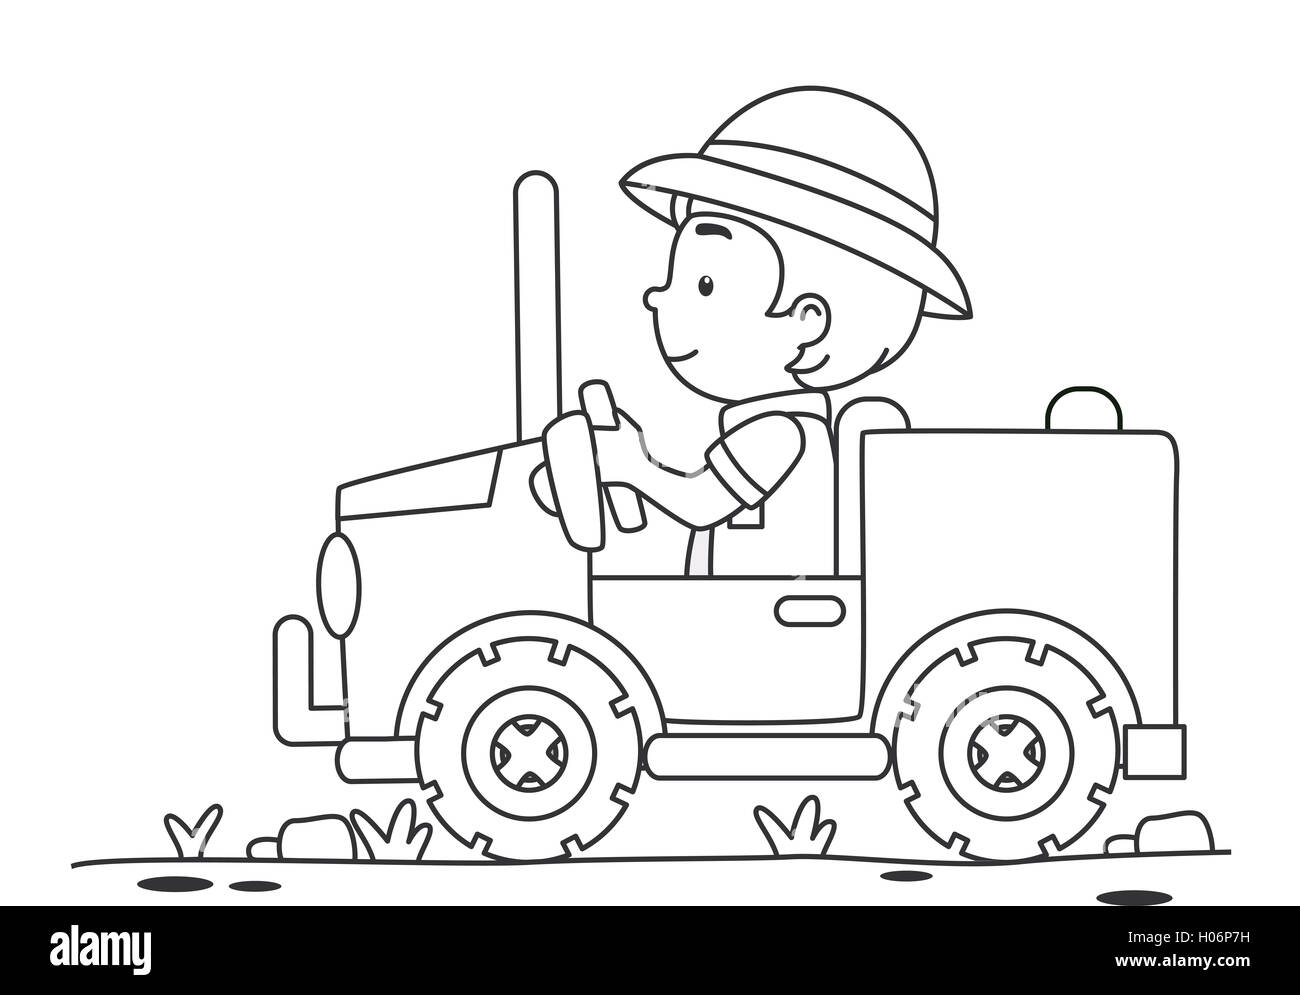 Black and White Coloring Page Illustration of a Boy Stock Photo